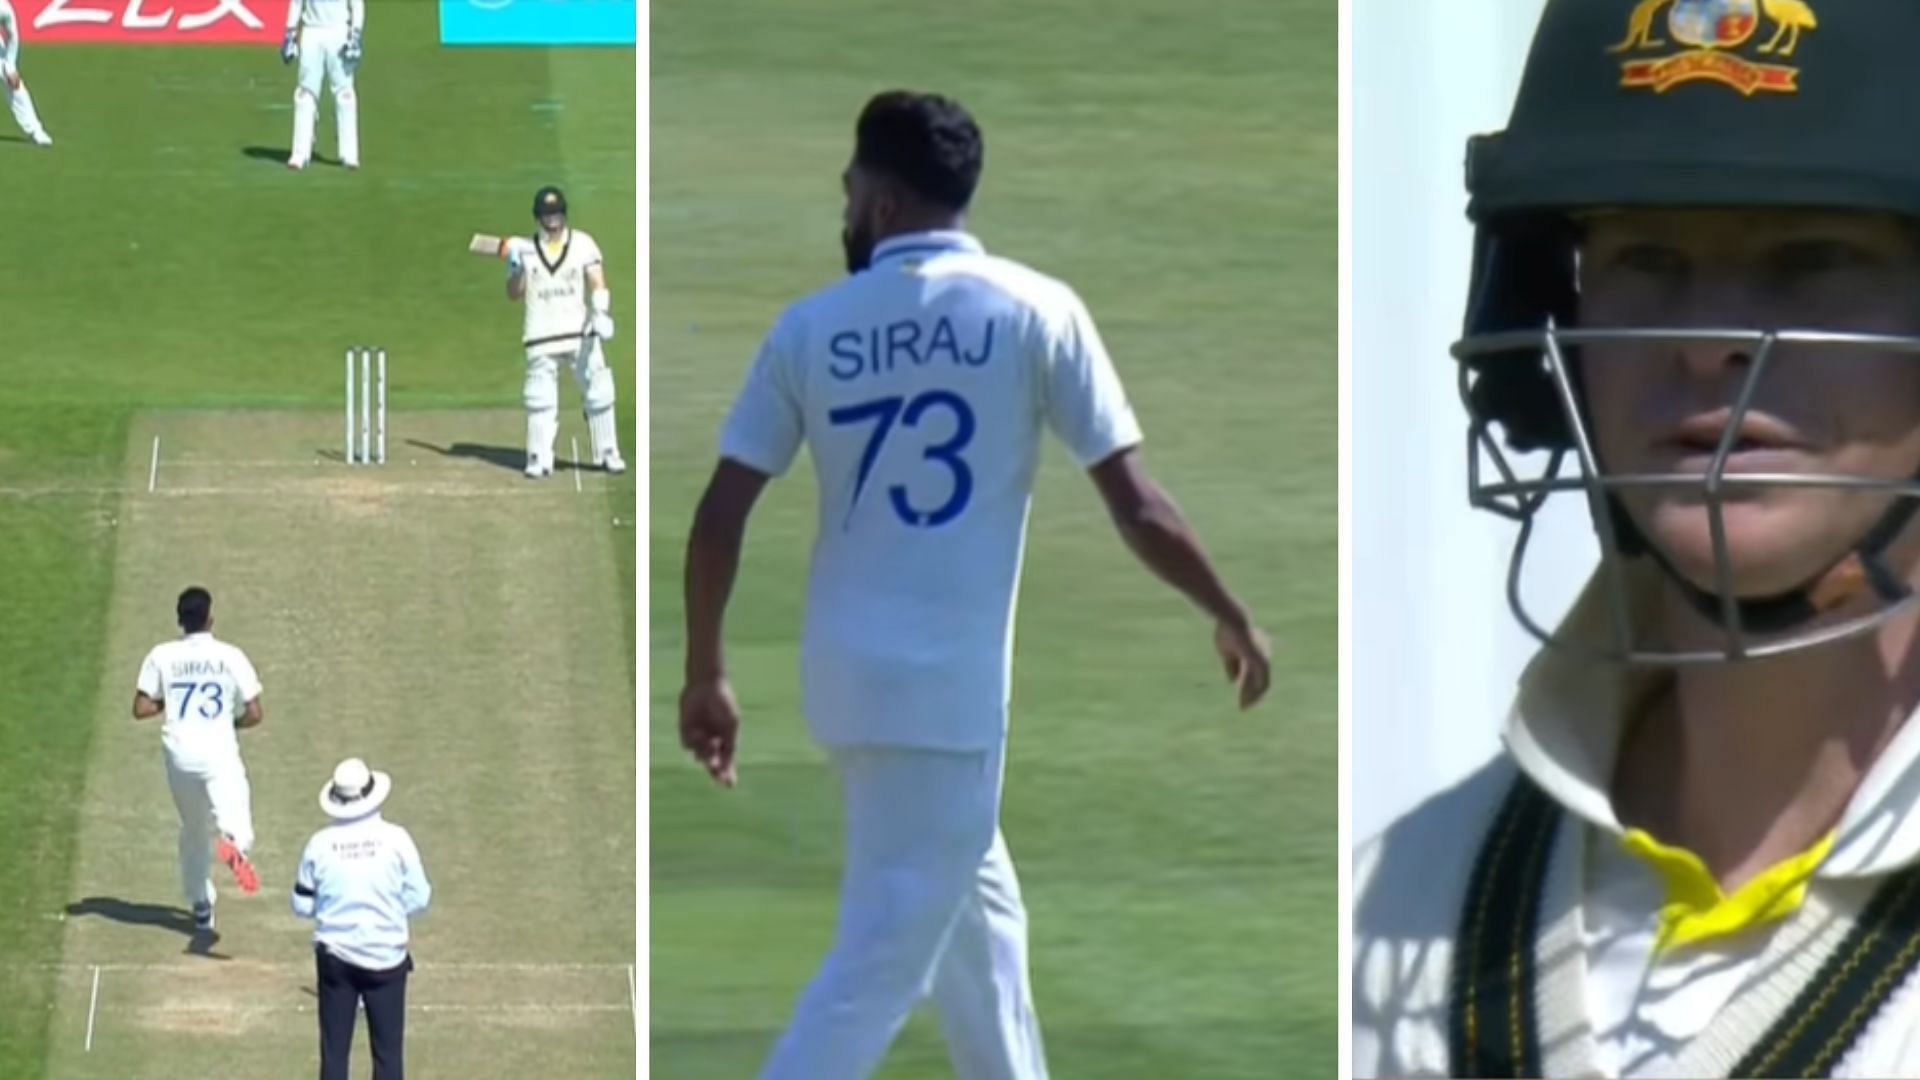 Snippets from video posted by ICC about Siraj and Smith